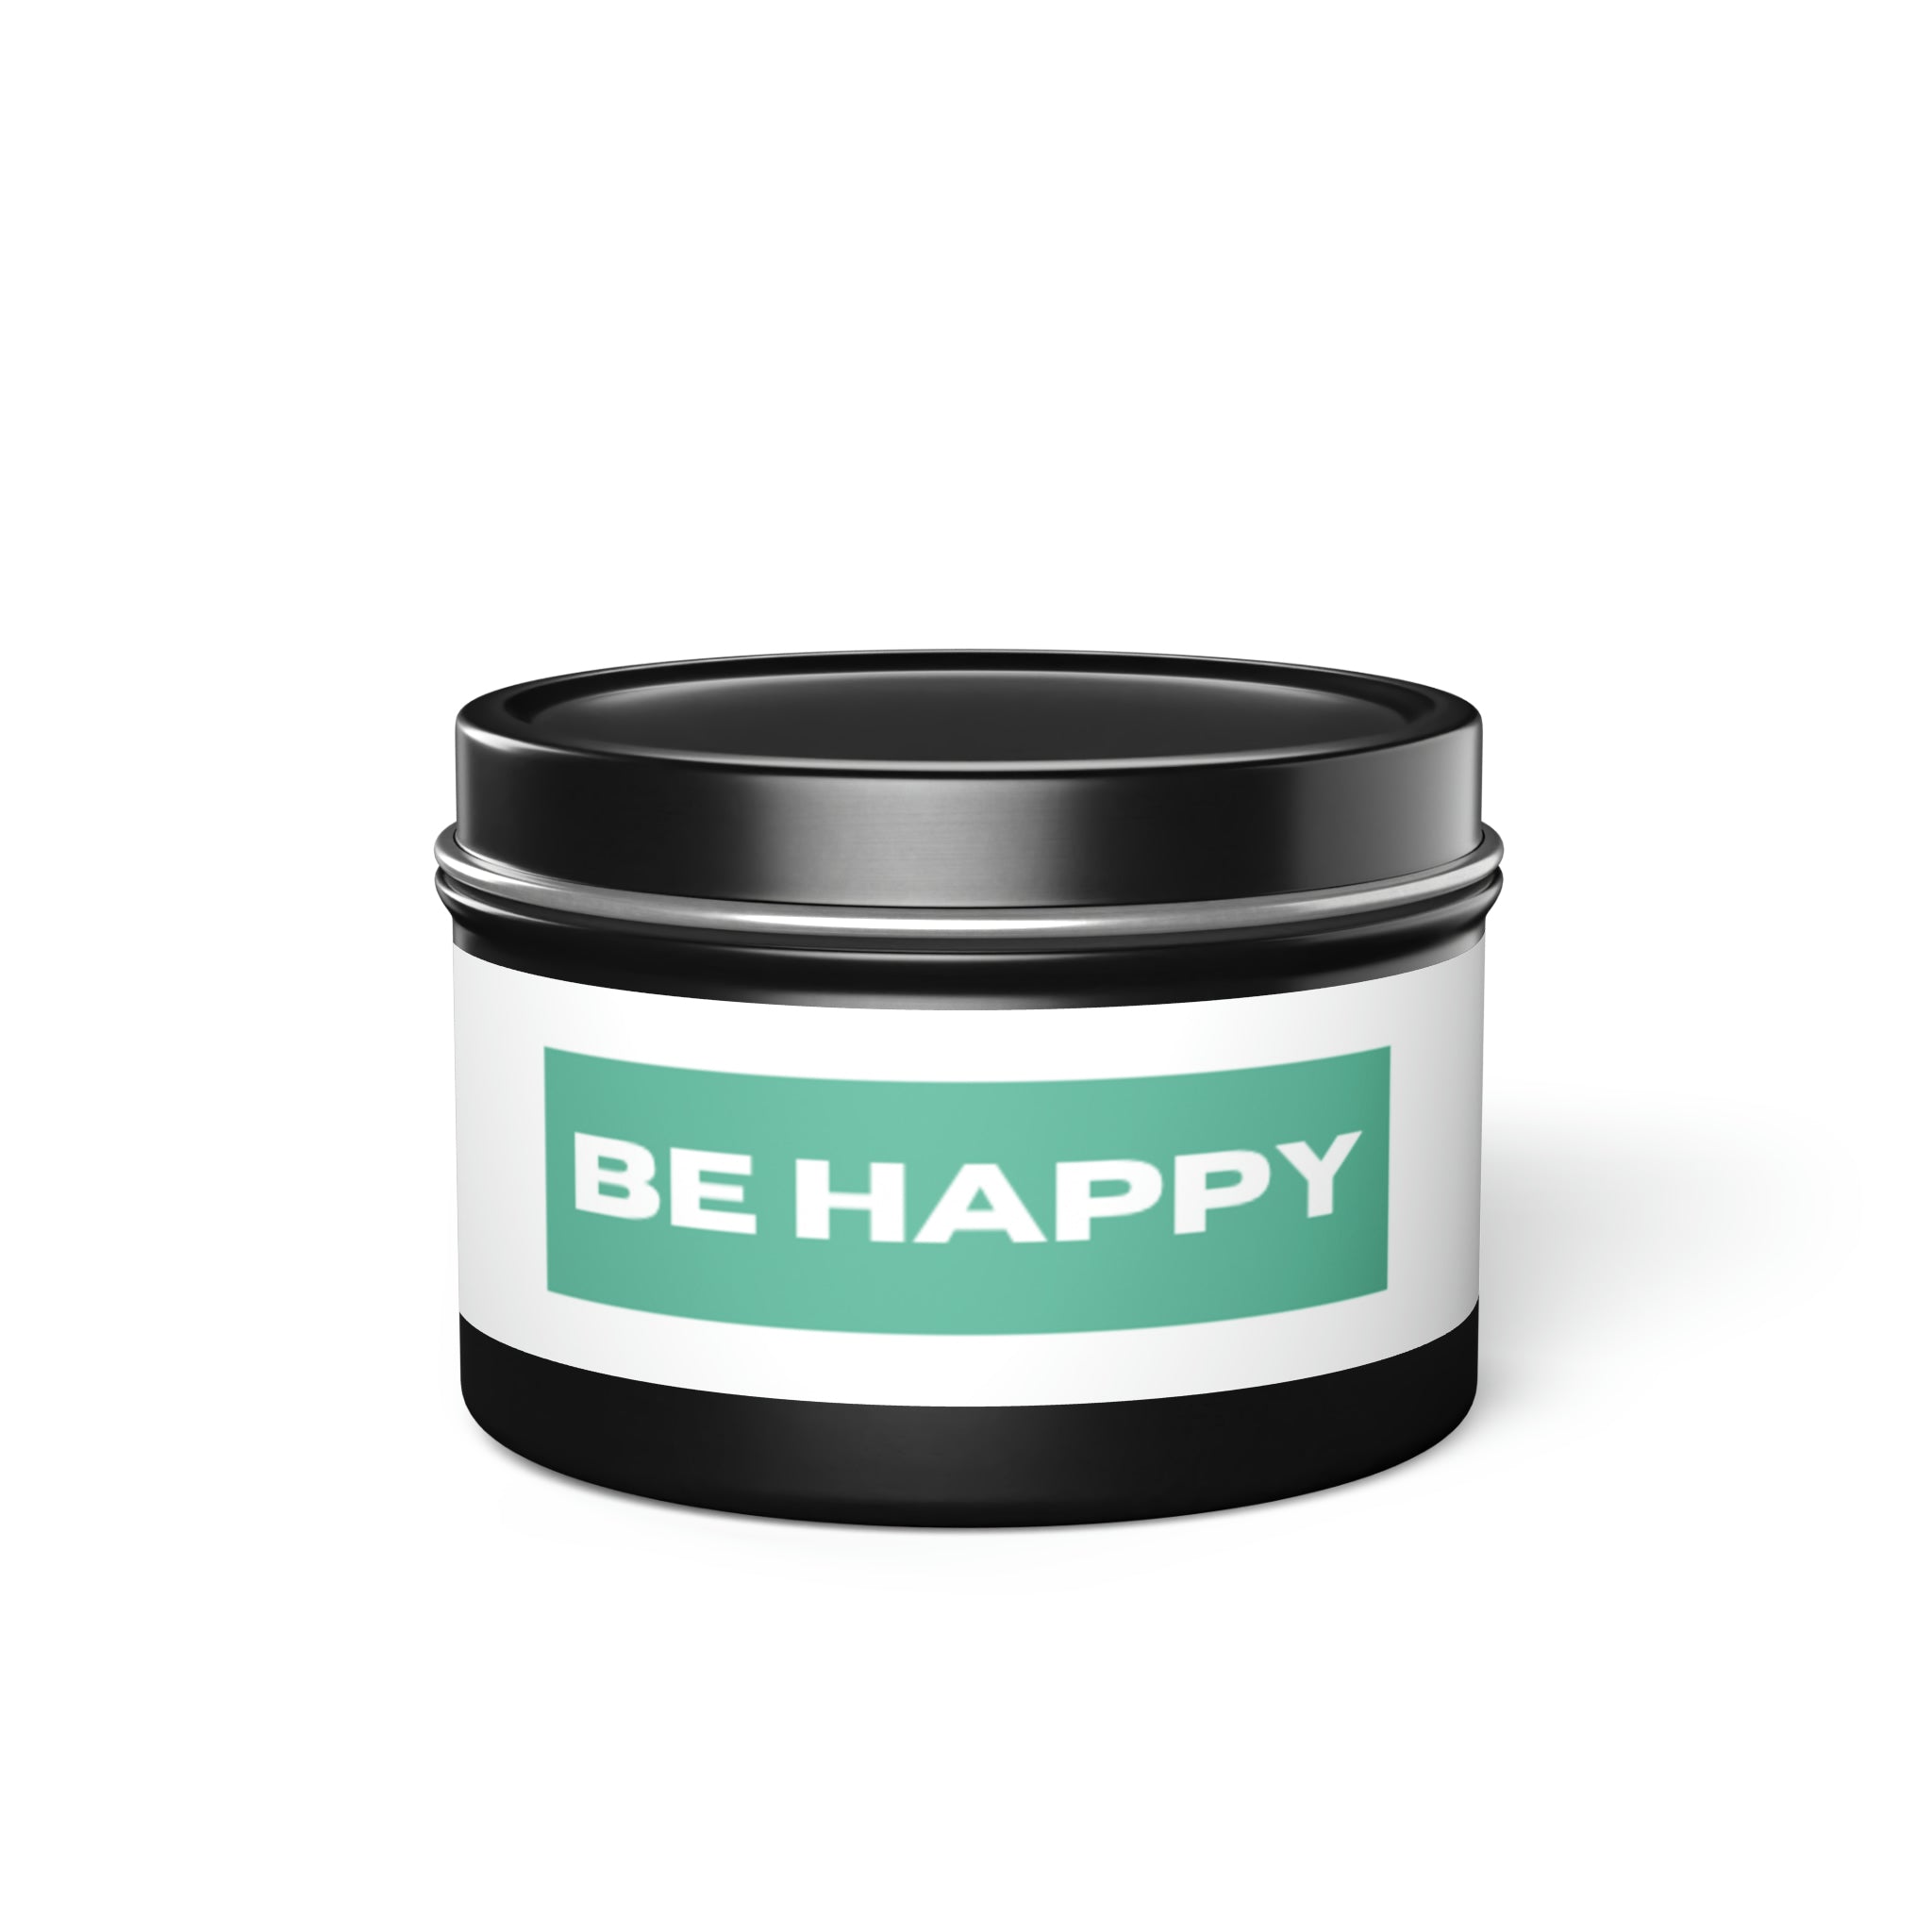 “Be Happy” Tin Candles